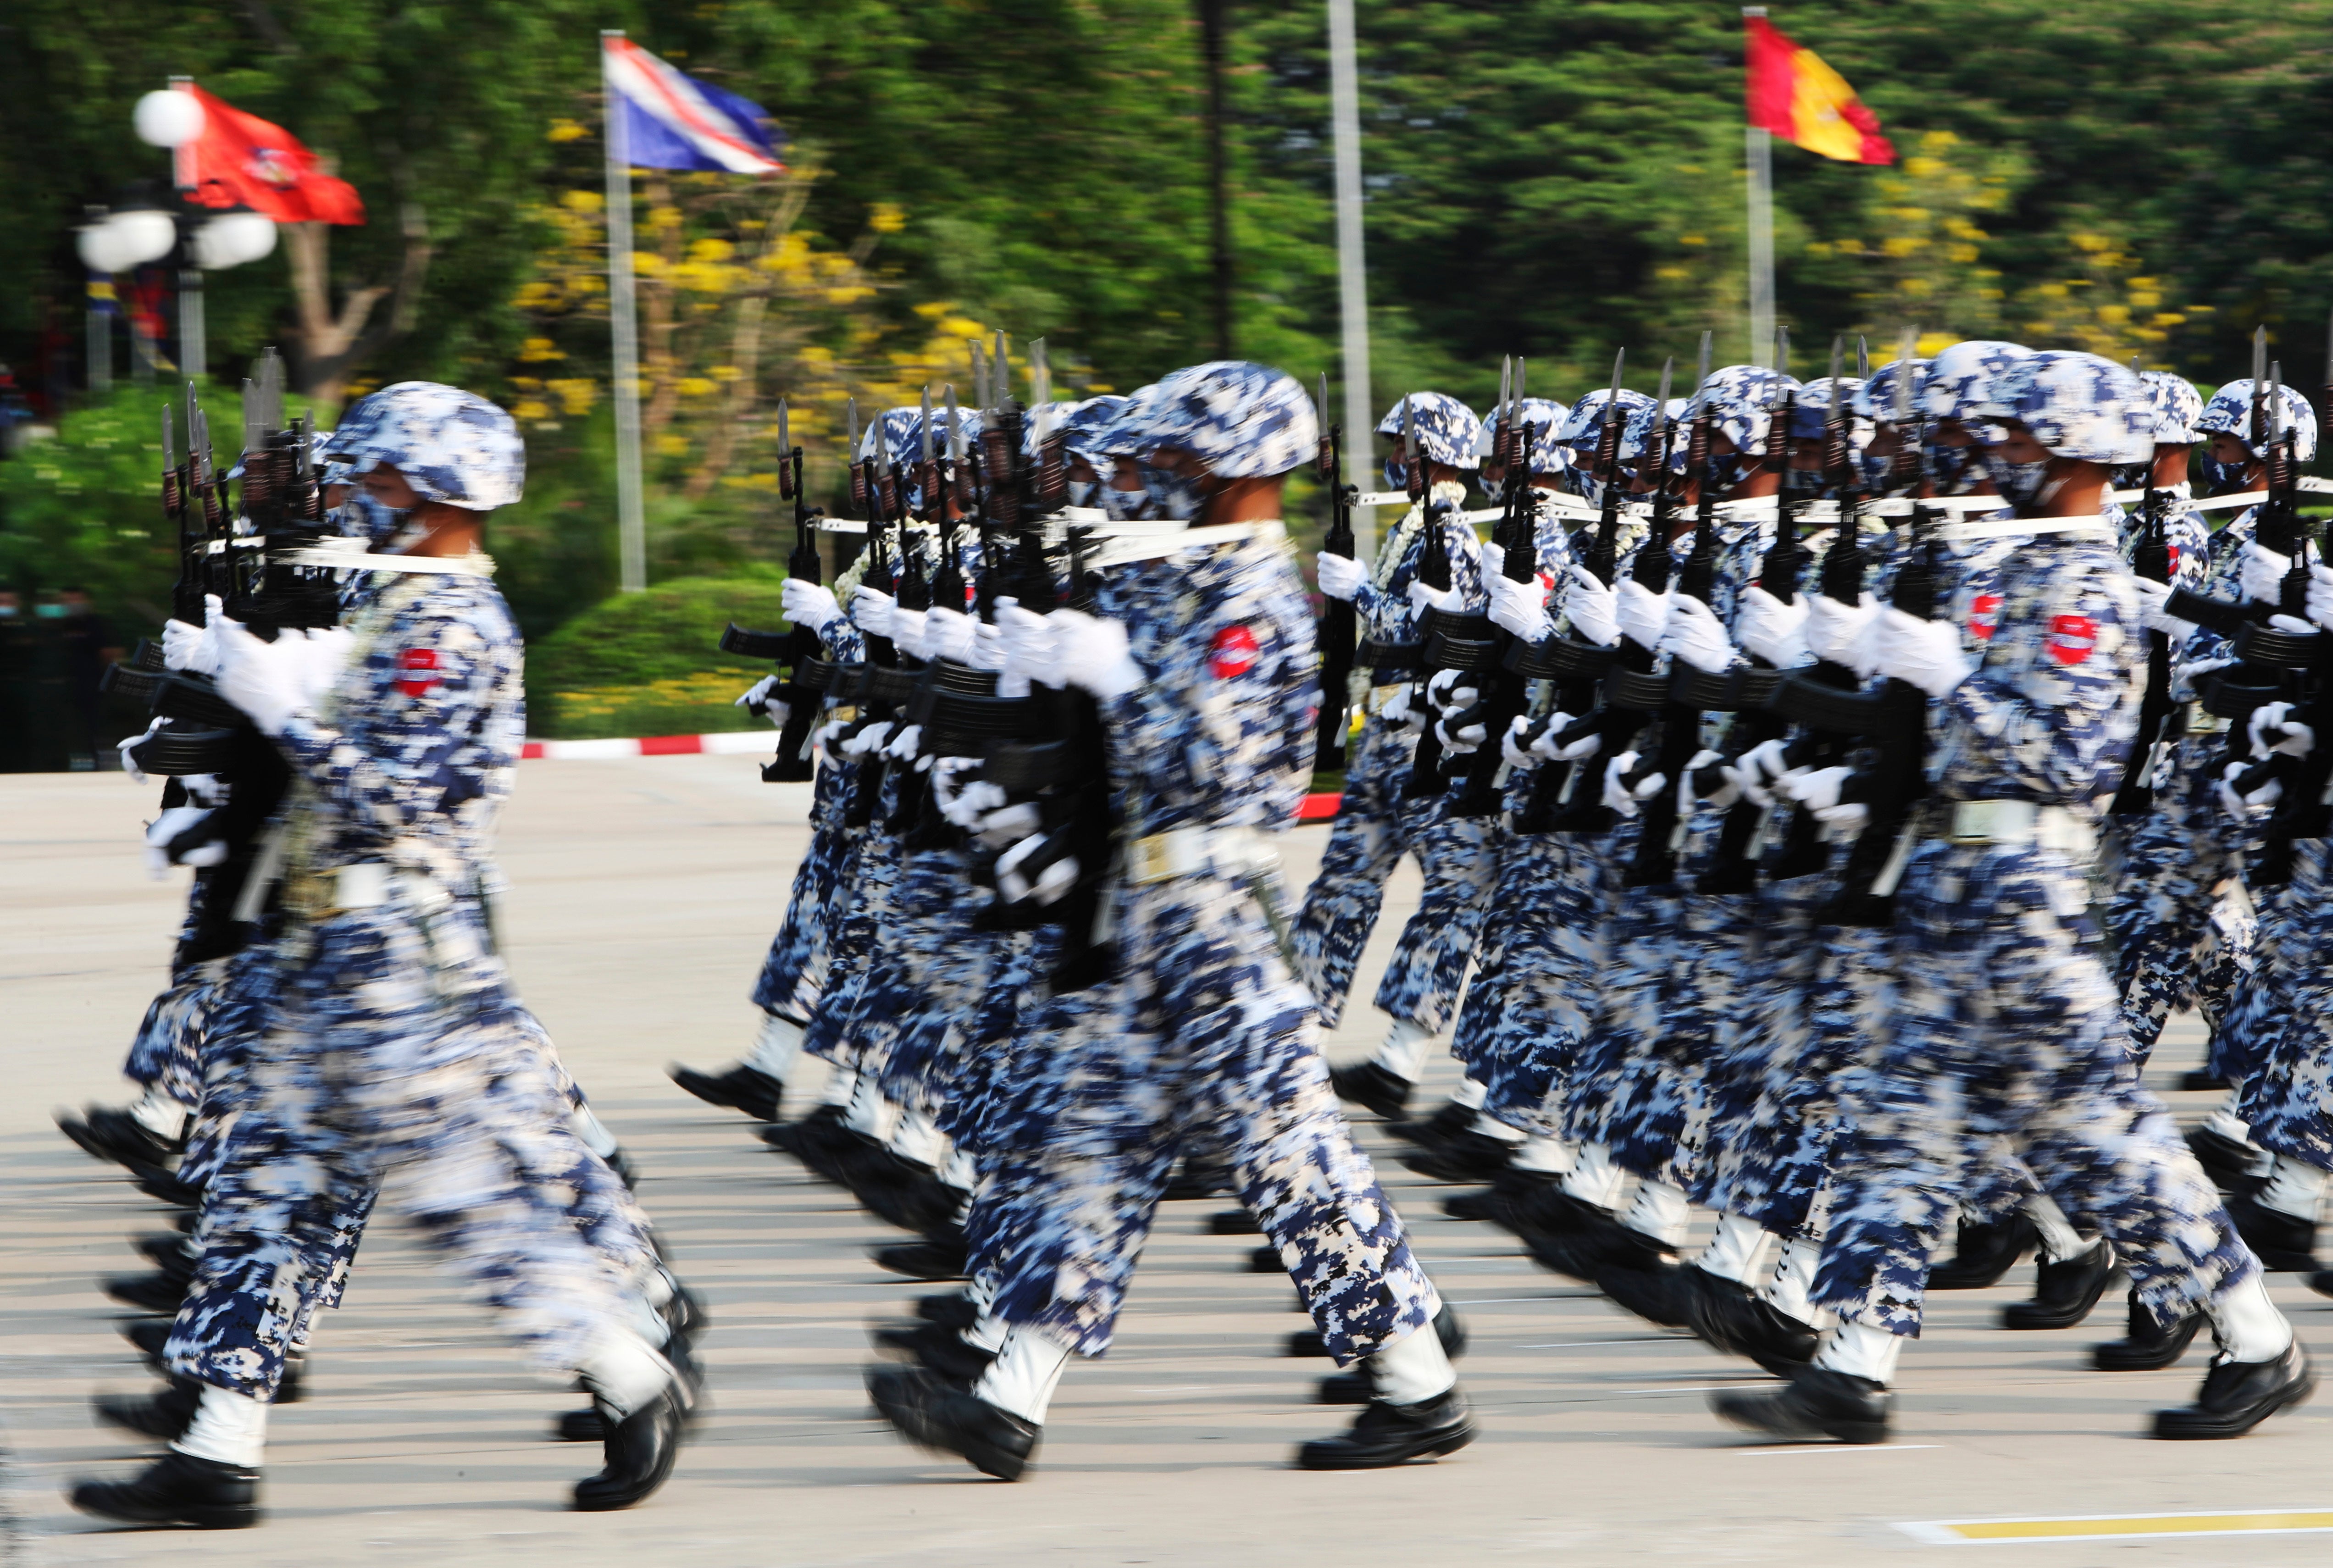 A parade to commemorate the Myanmar’s Armed Forces Day